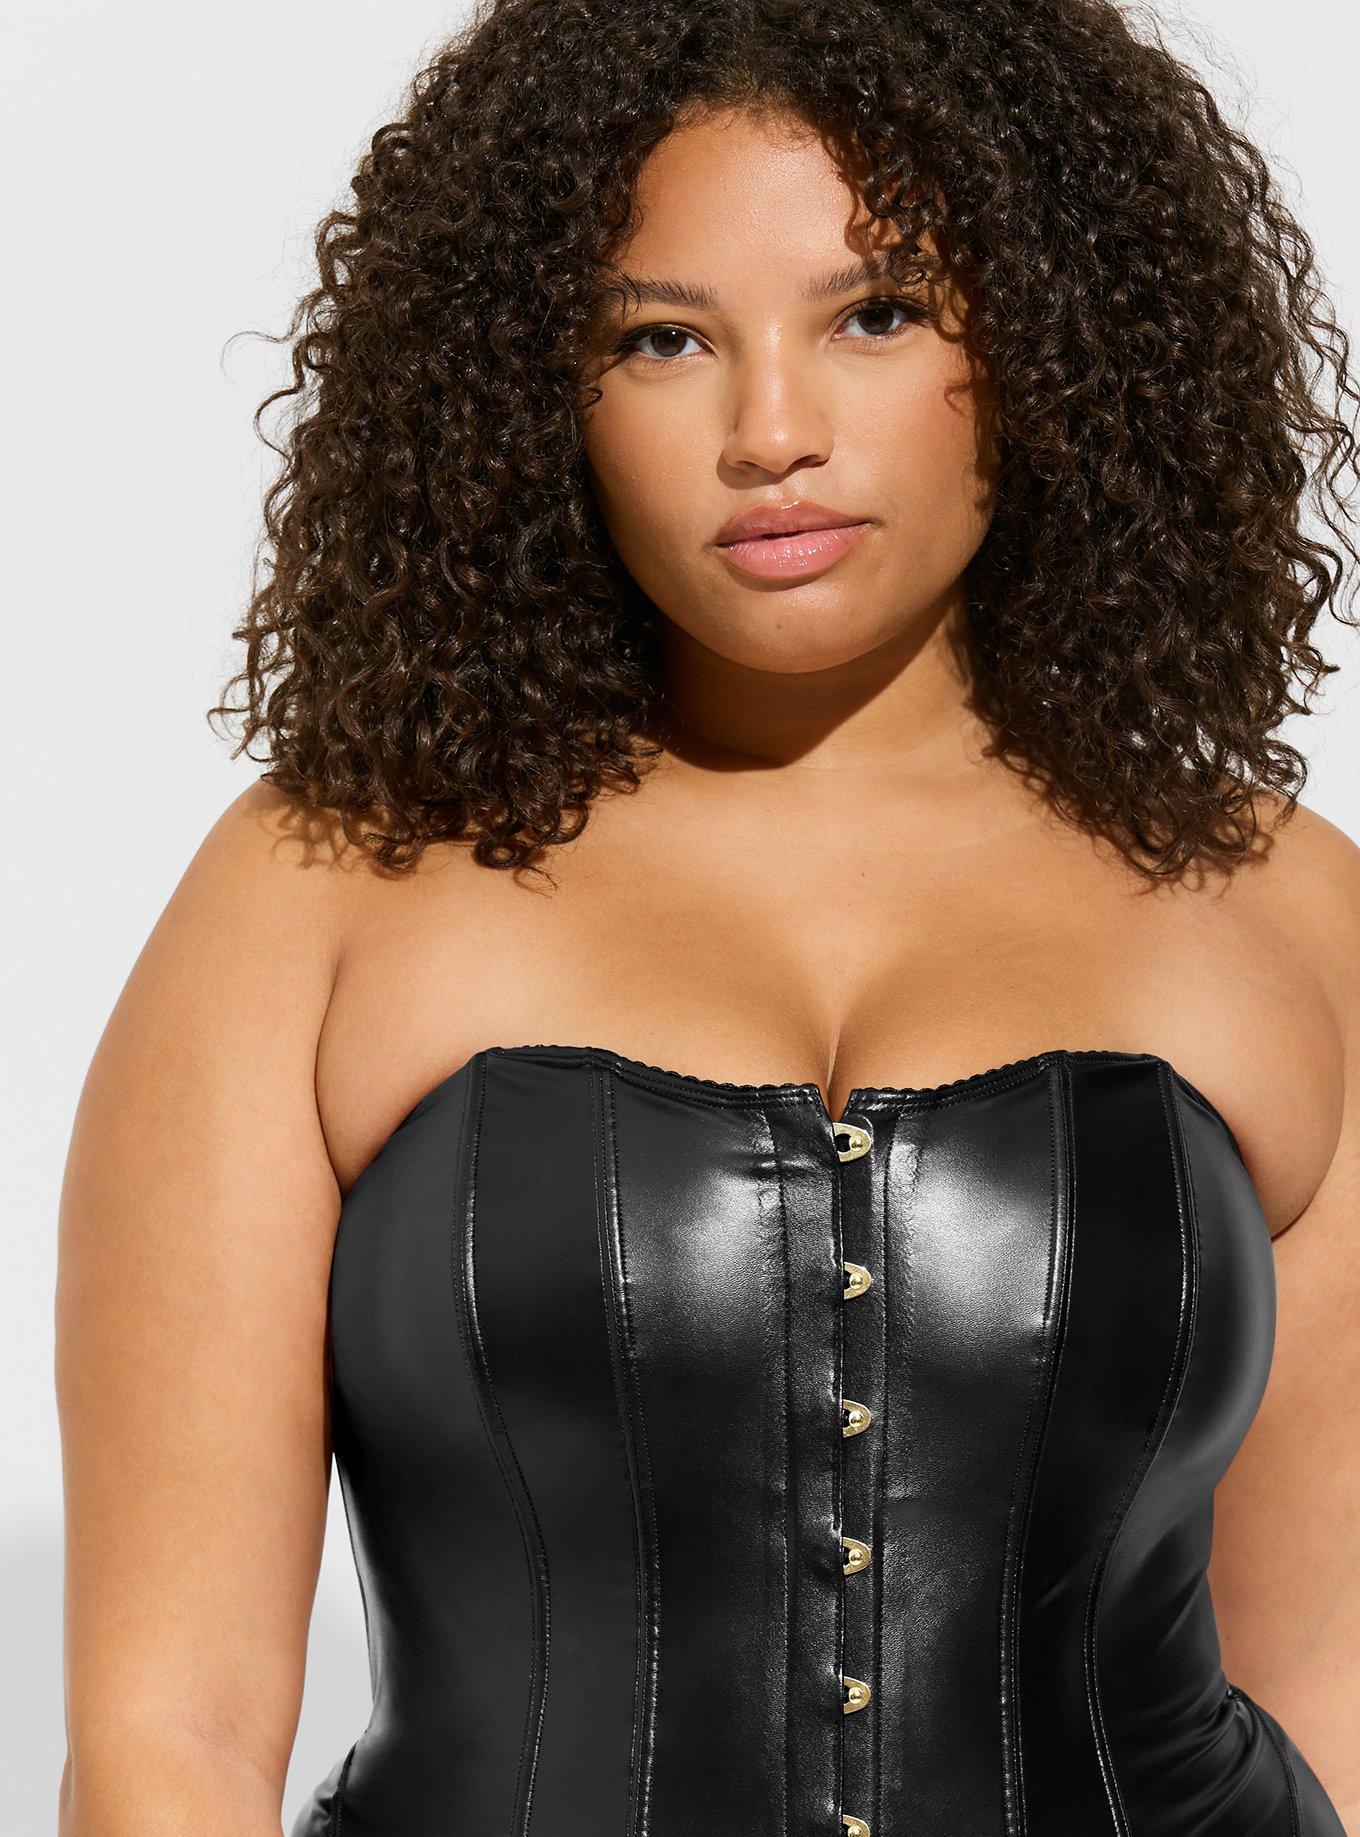 I'm busty & plus-size and I tried the corset top trend - it held my girls  in place surprisingly well